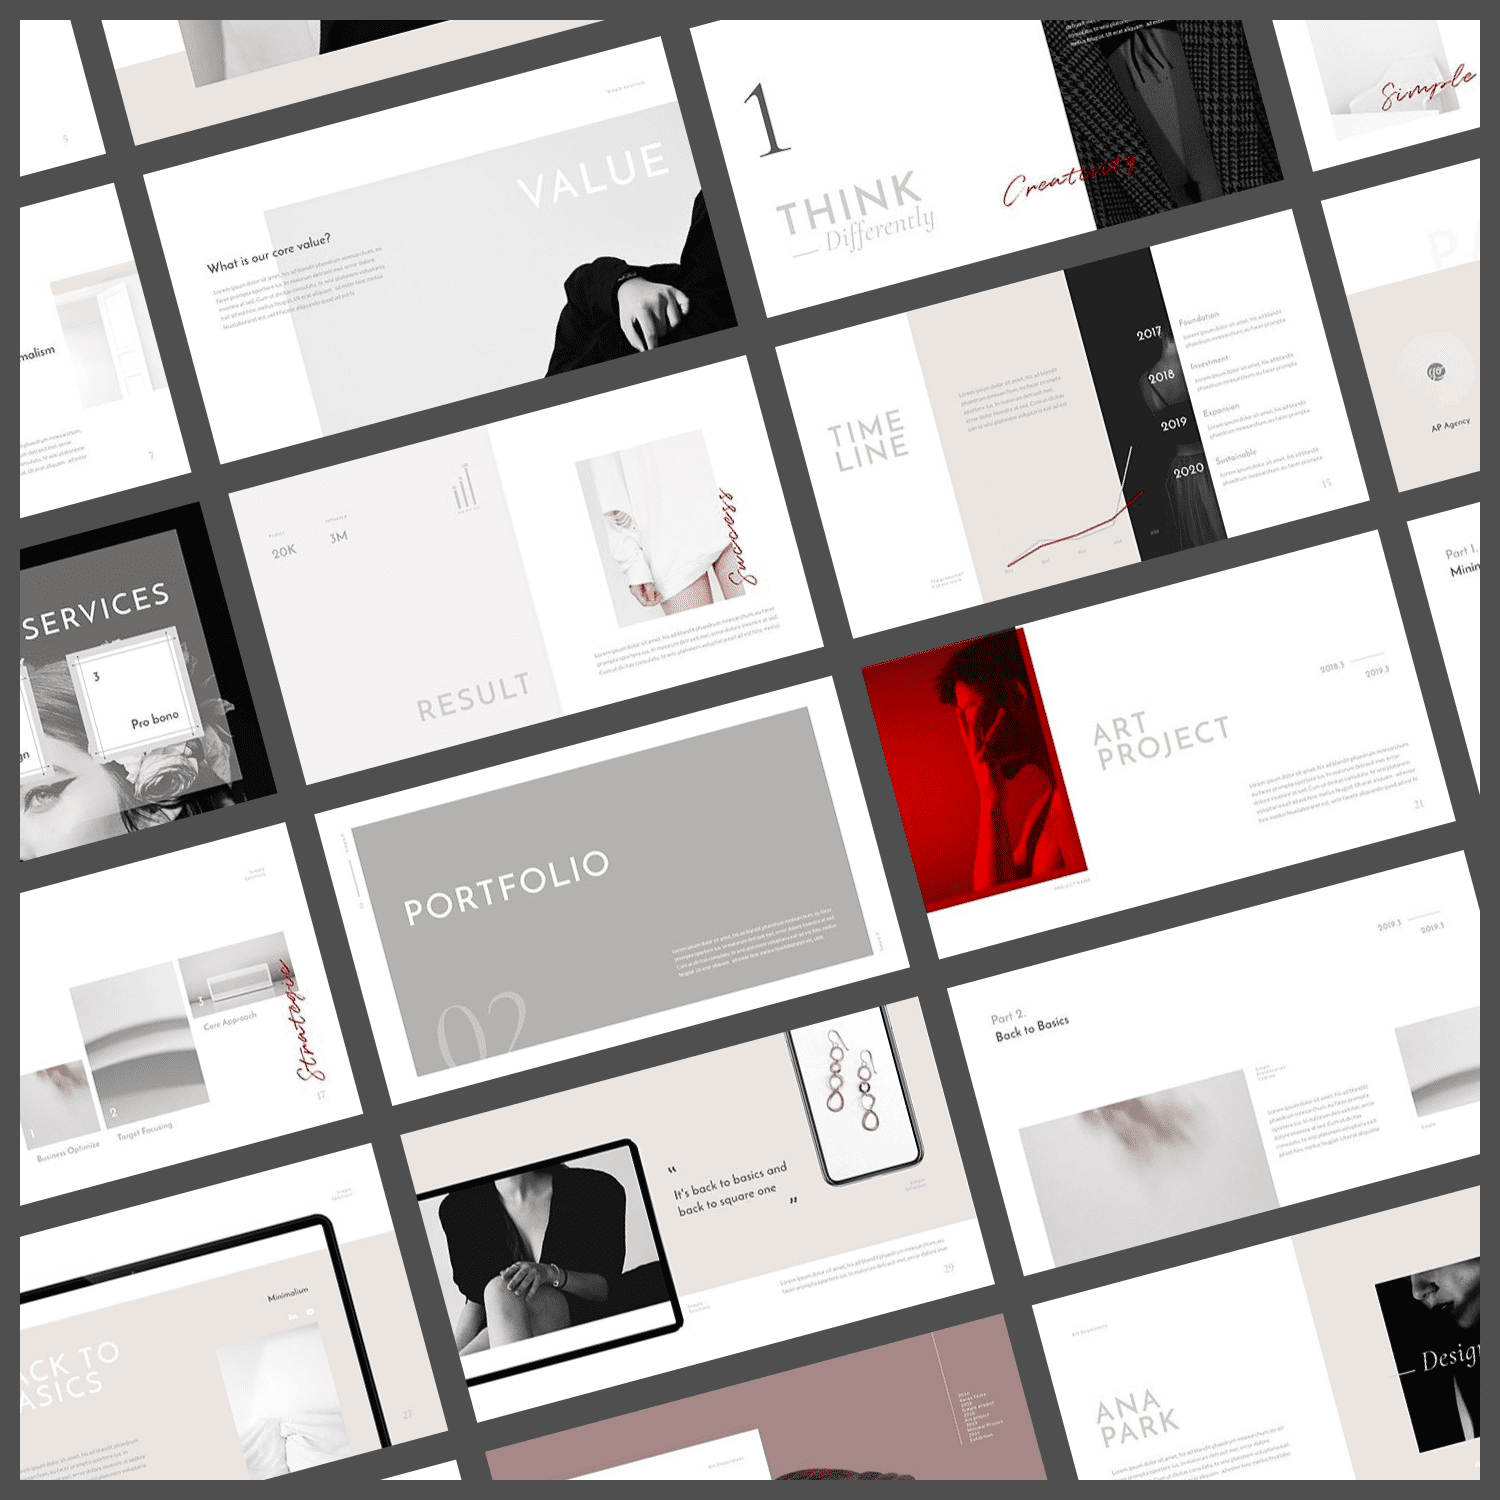 Basic PowerPoint Template by MasterBundles Collage Image.